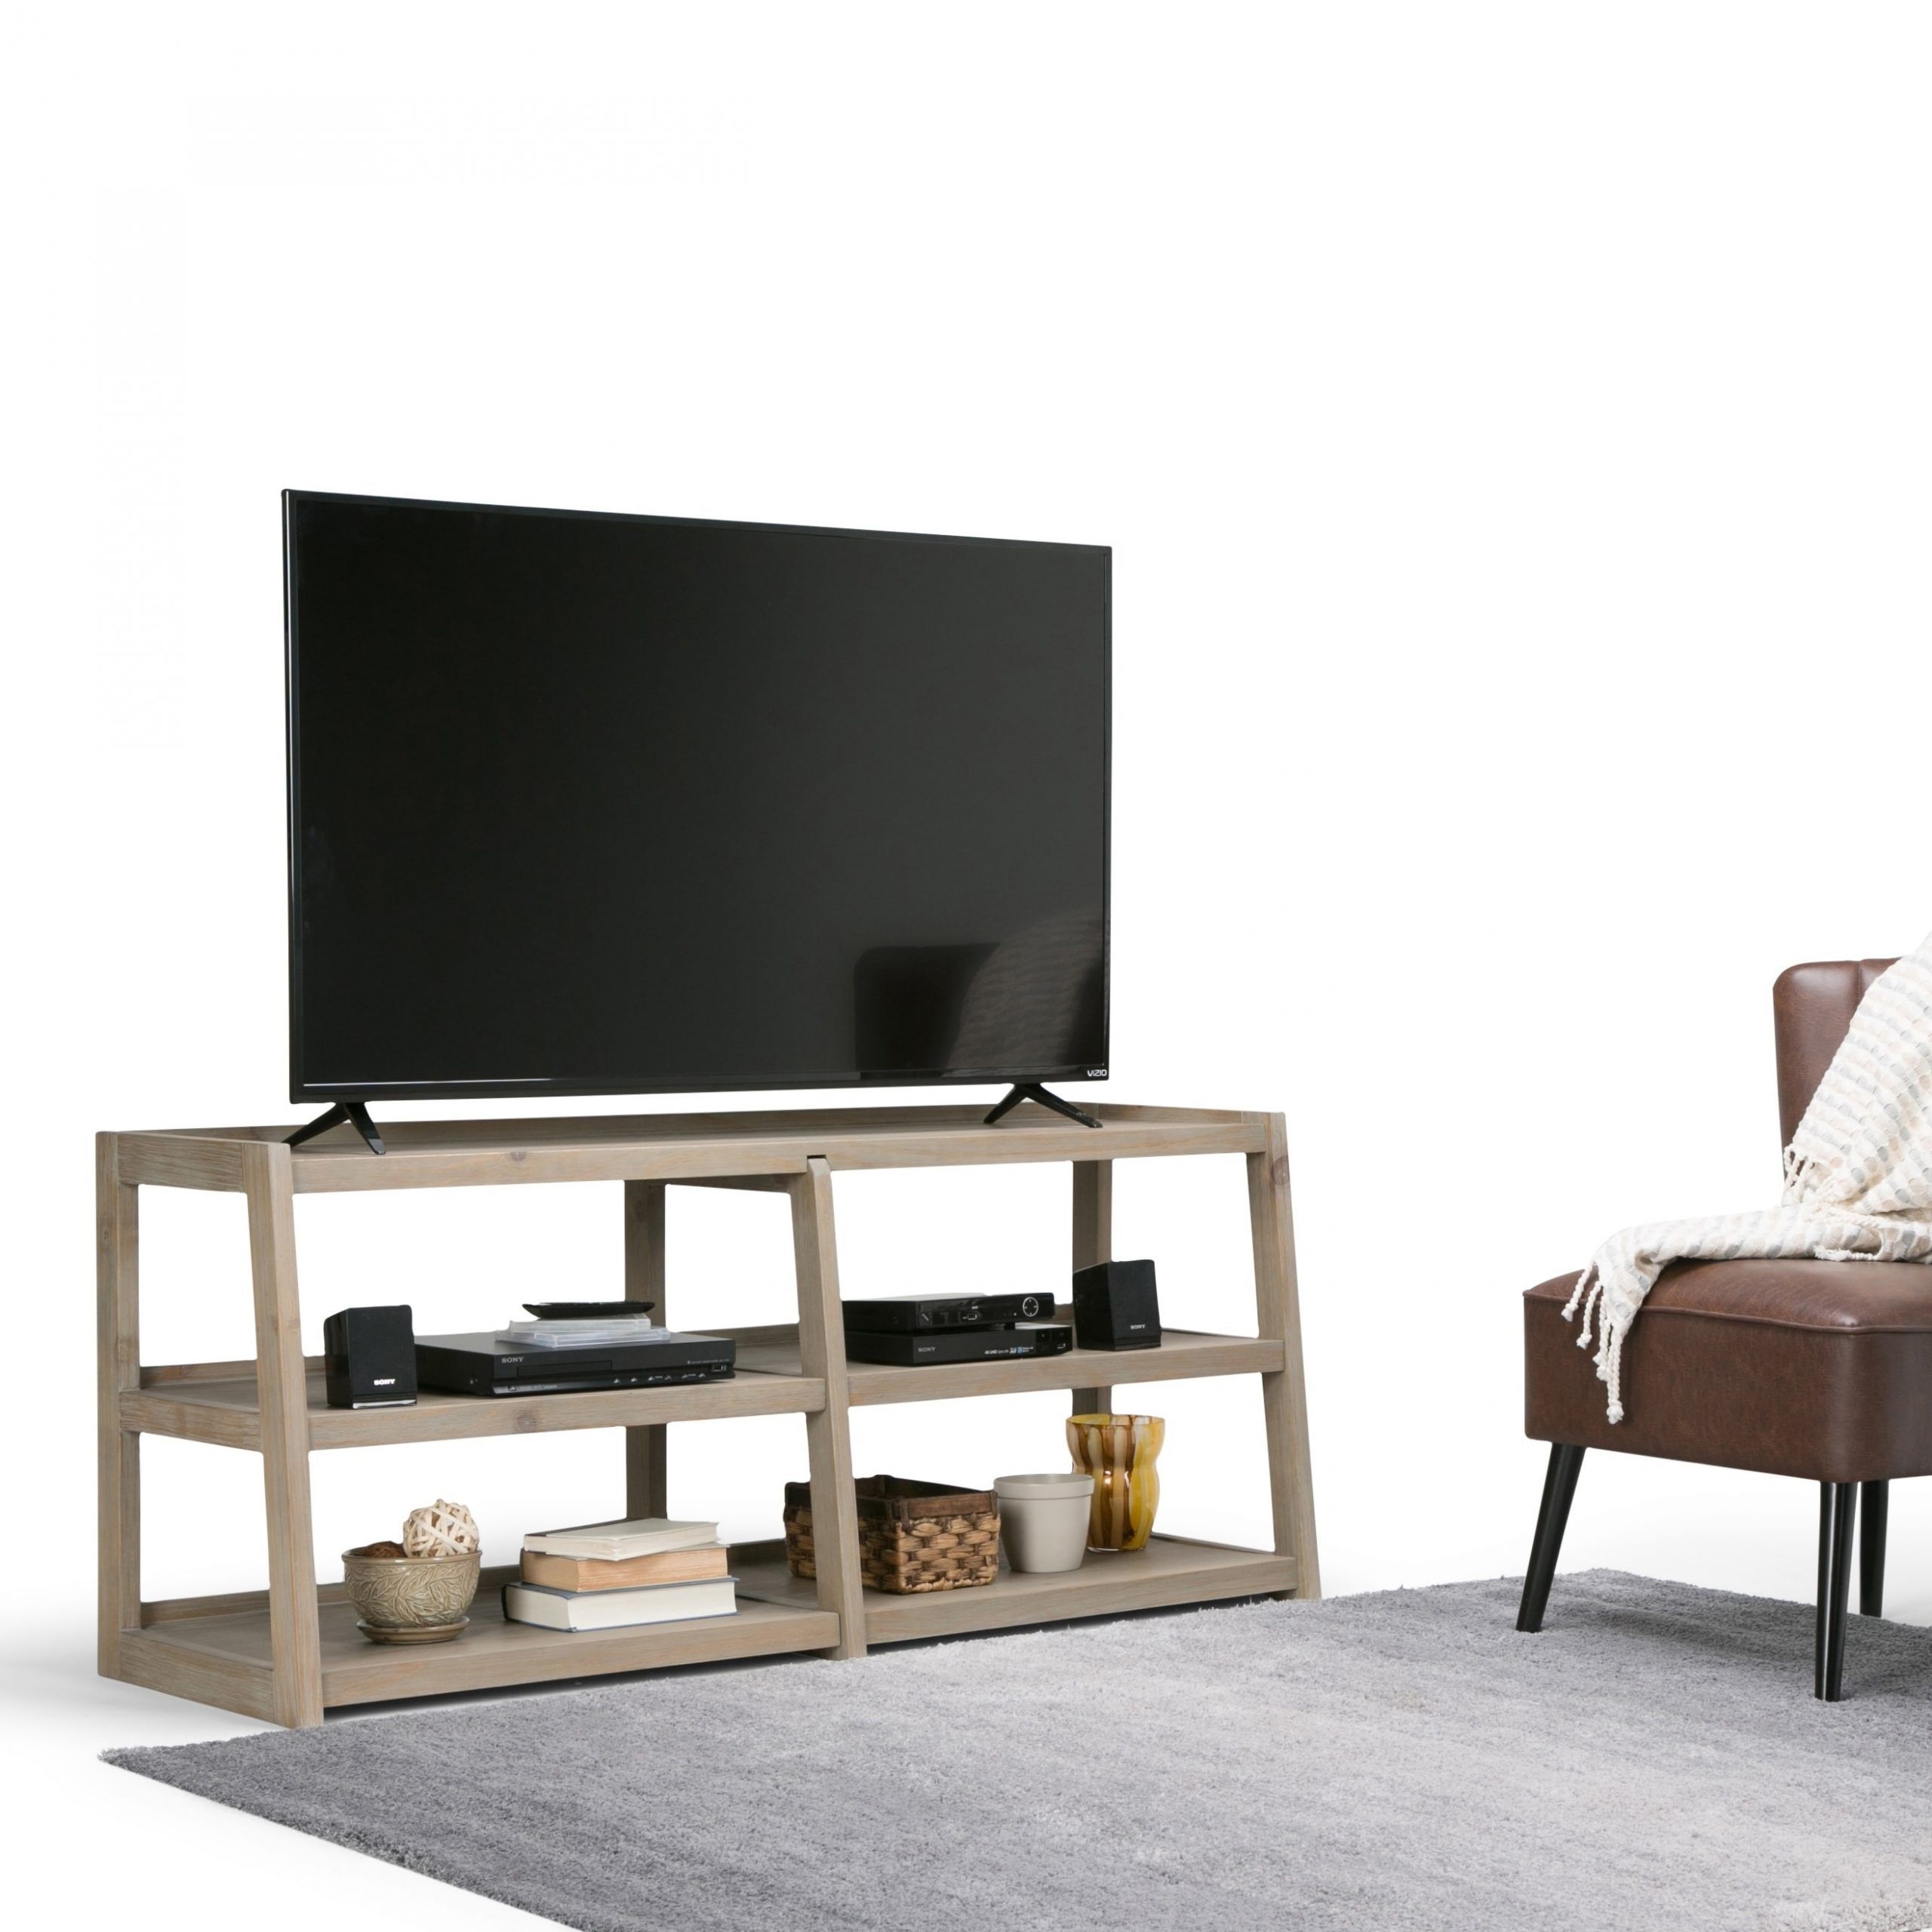 Wyndenhall Hawkins Solid Wood 60 Inch Wide Modern Throughout Industrial Tv Stands (View 7 of 15)